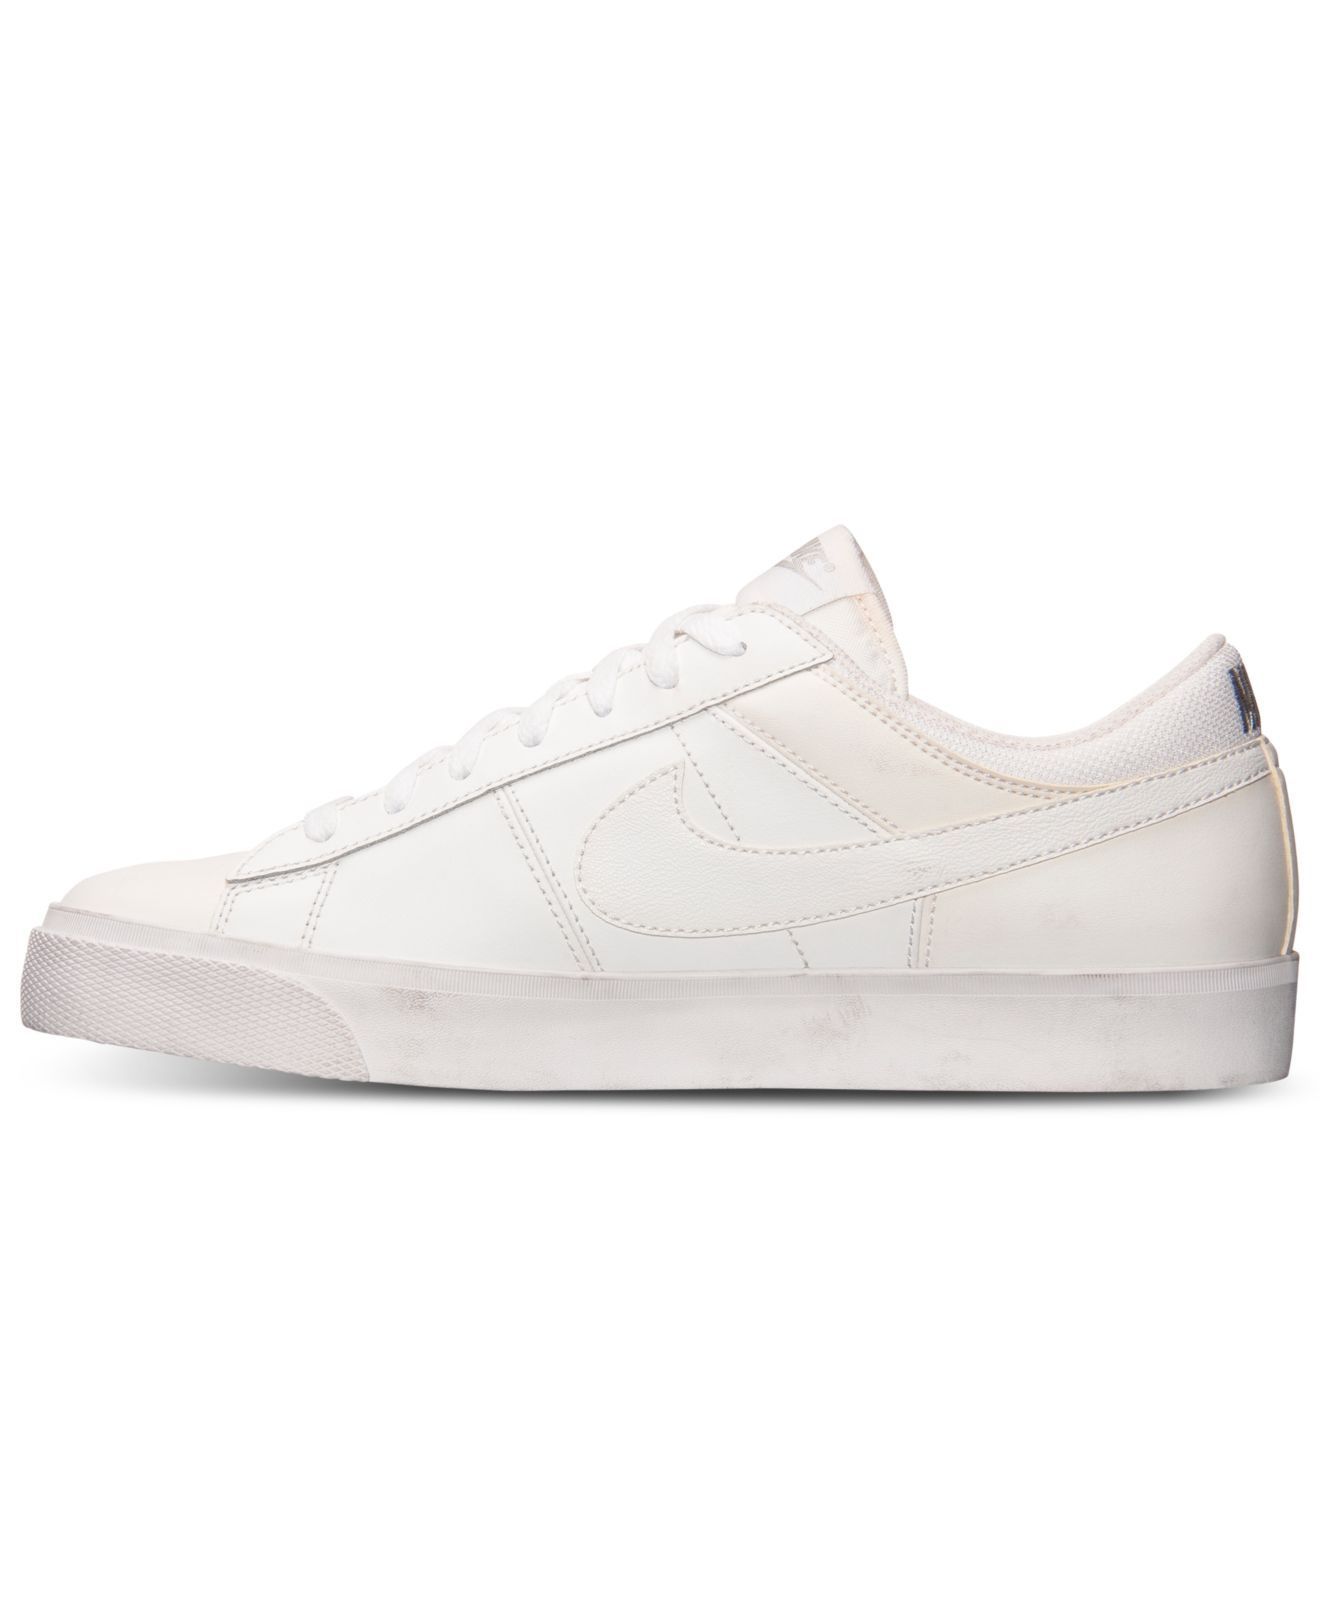 nike mens white leather shoes